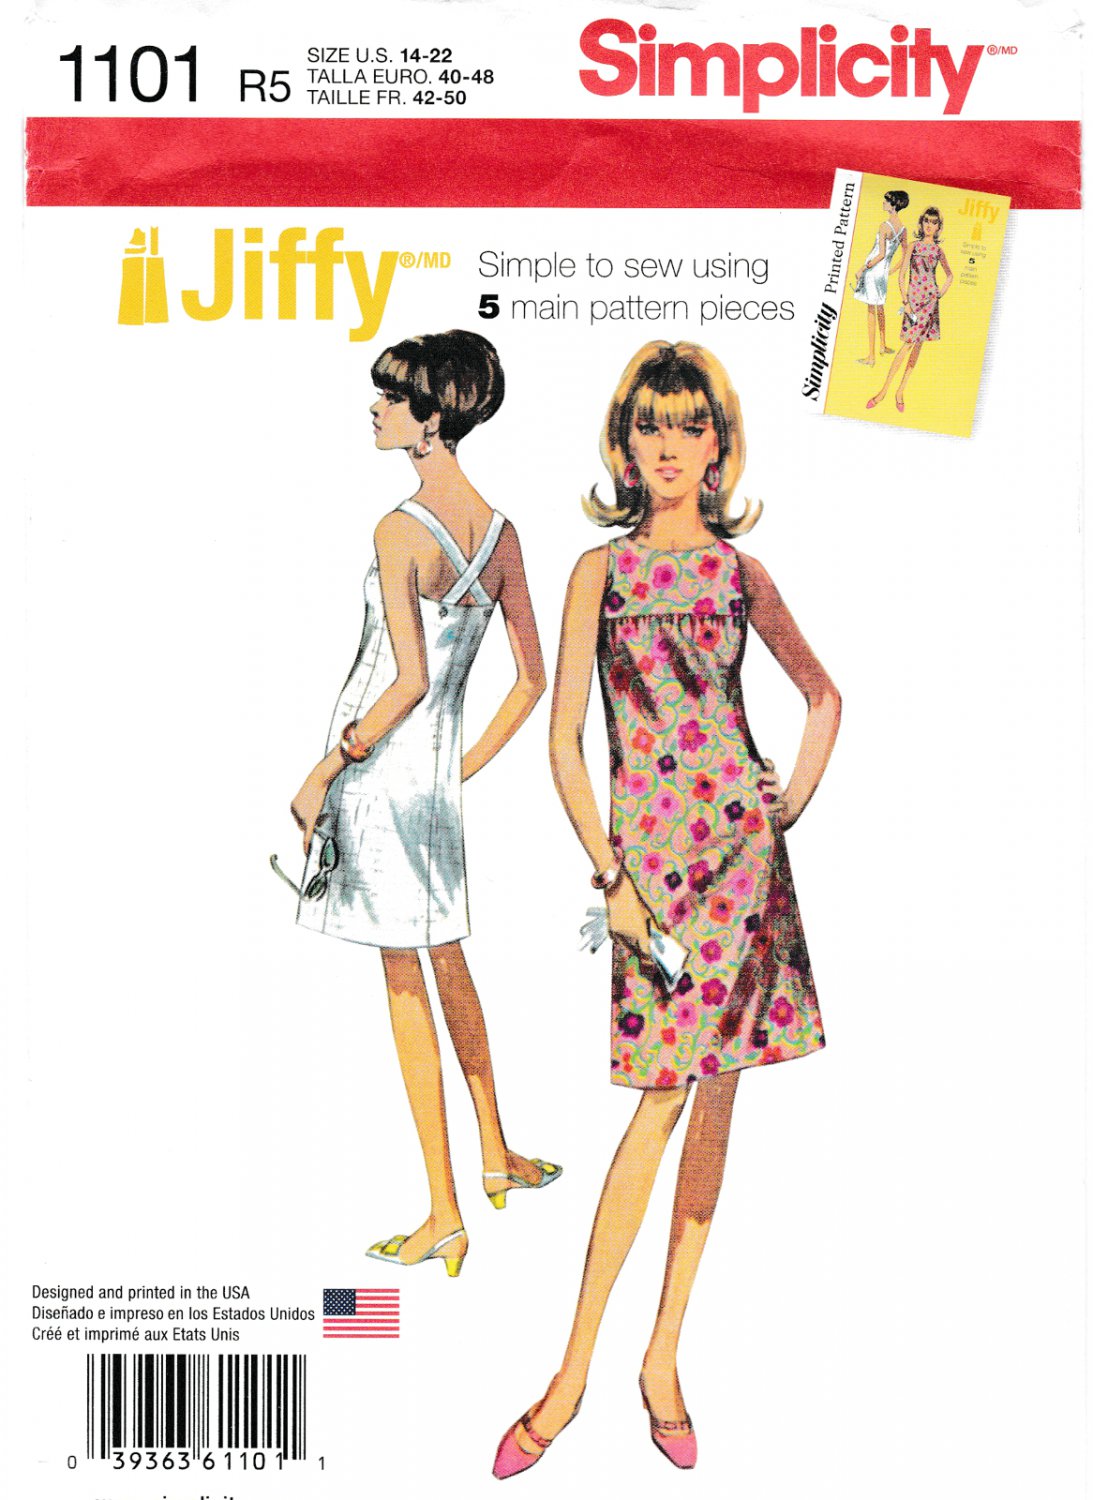 Simplicity 1101 Misses Womens Dress Sewing Pattern Sizes 14-16-18-20-22 Easy To Sew